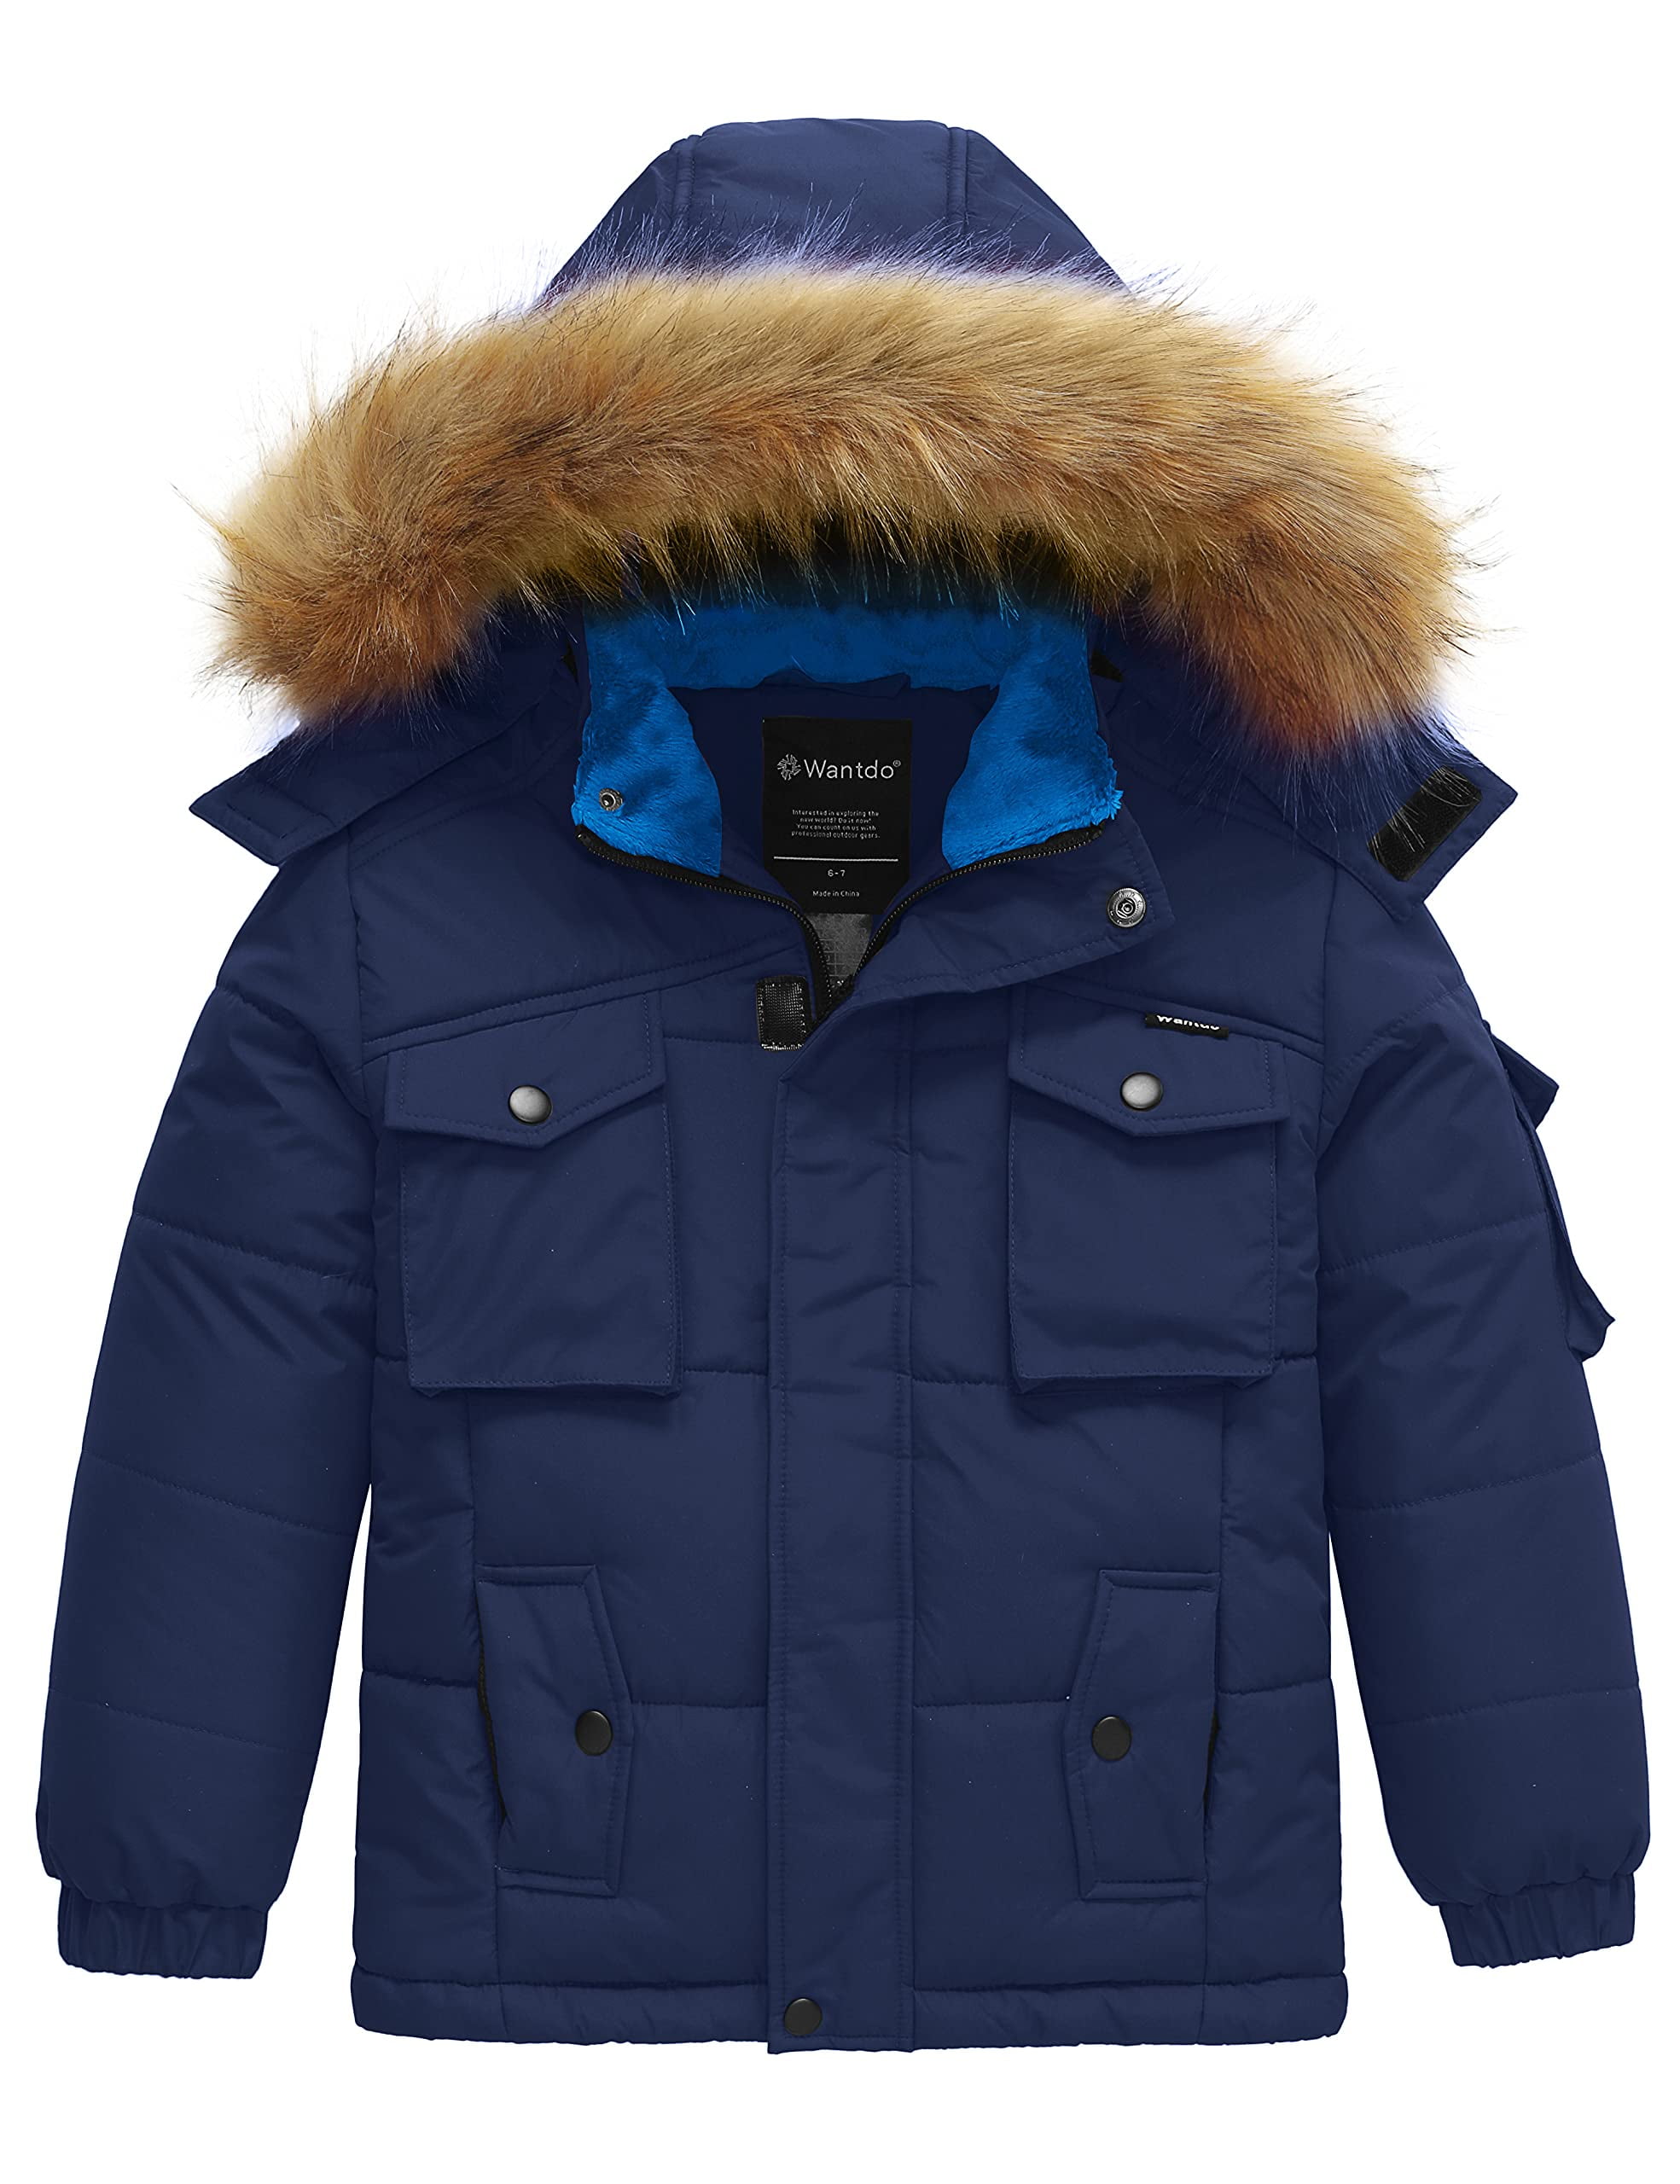 Wantdo Boys Winter Coat Thick Padded Puffer Jacket with Removable Fur Hood 